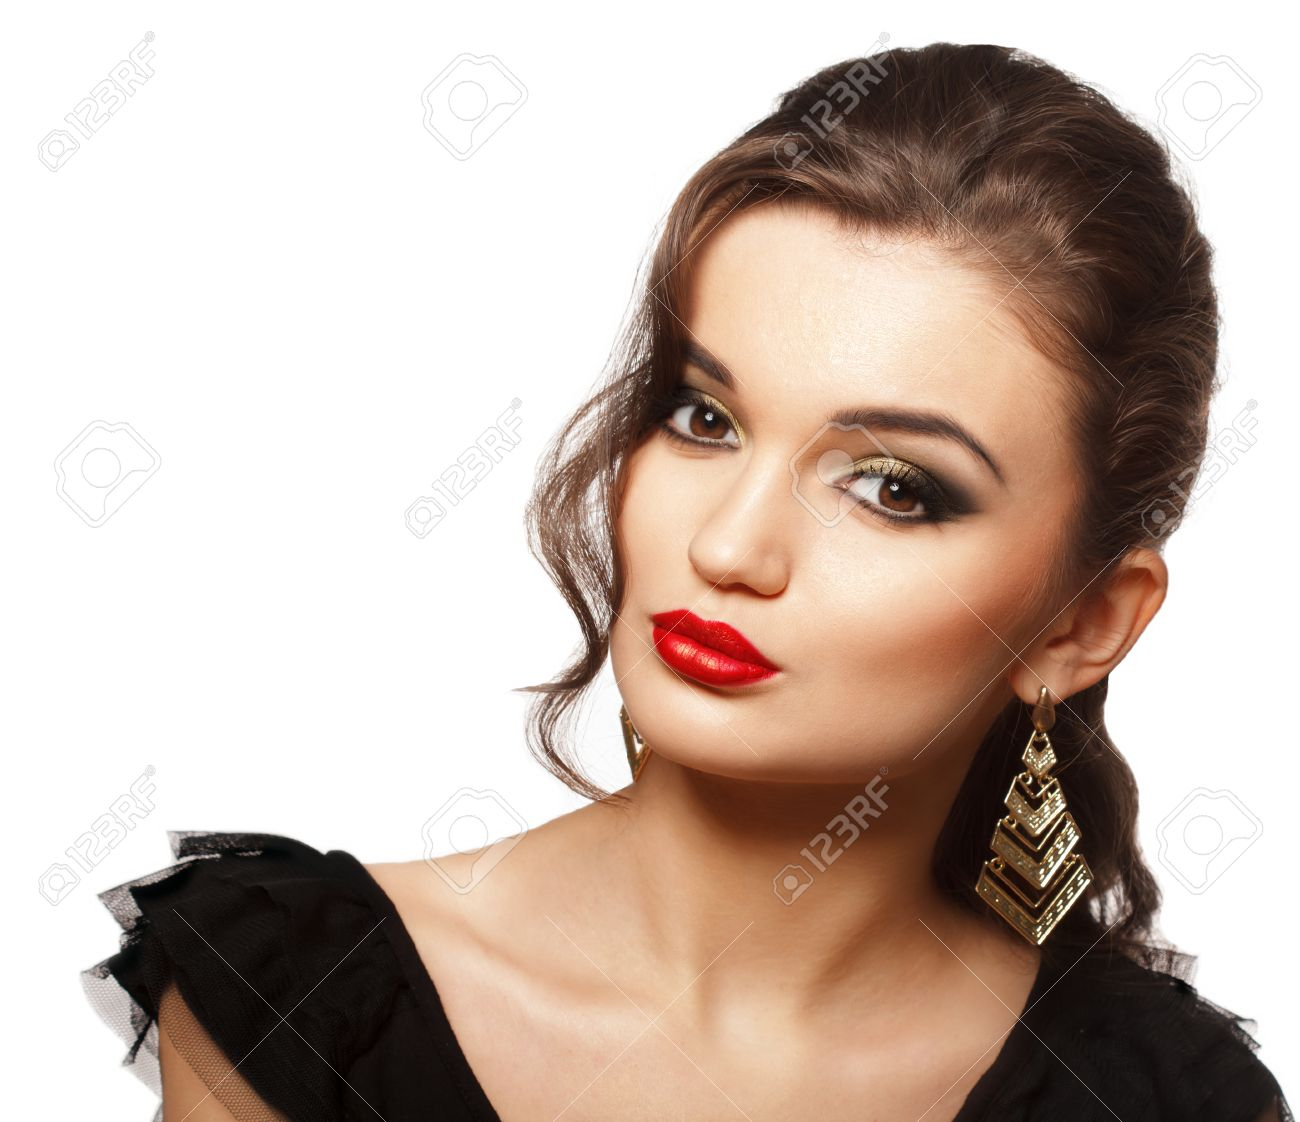 Eye Makeup With Black Dress Fashion Girl Portrait In Black Dress Evening Bright Makeup And